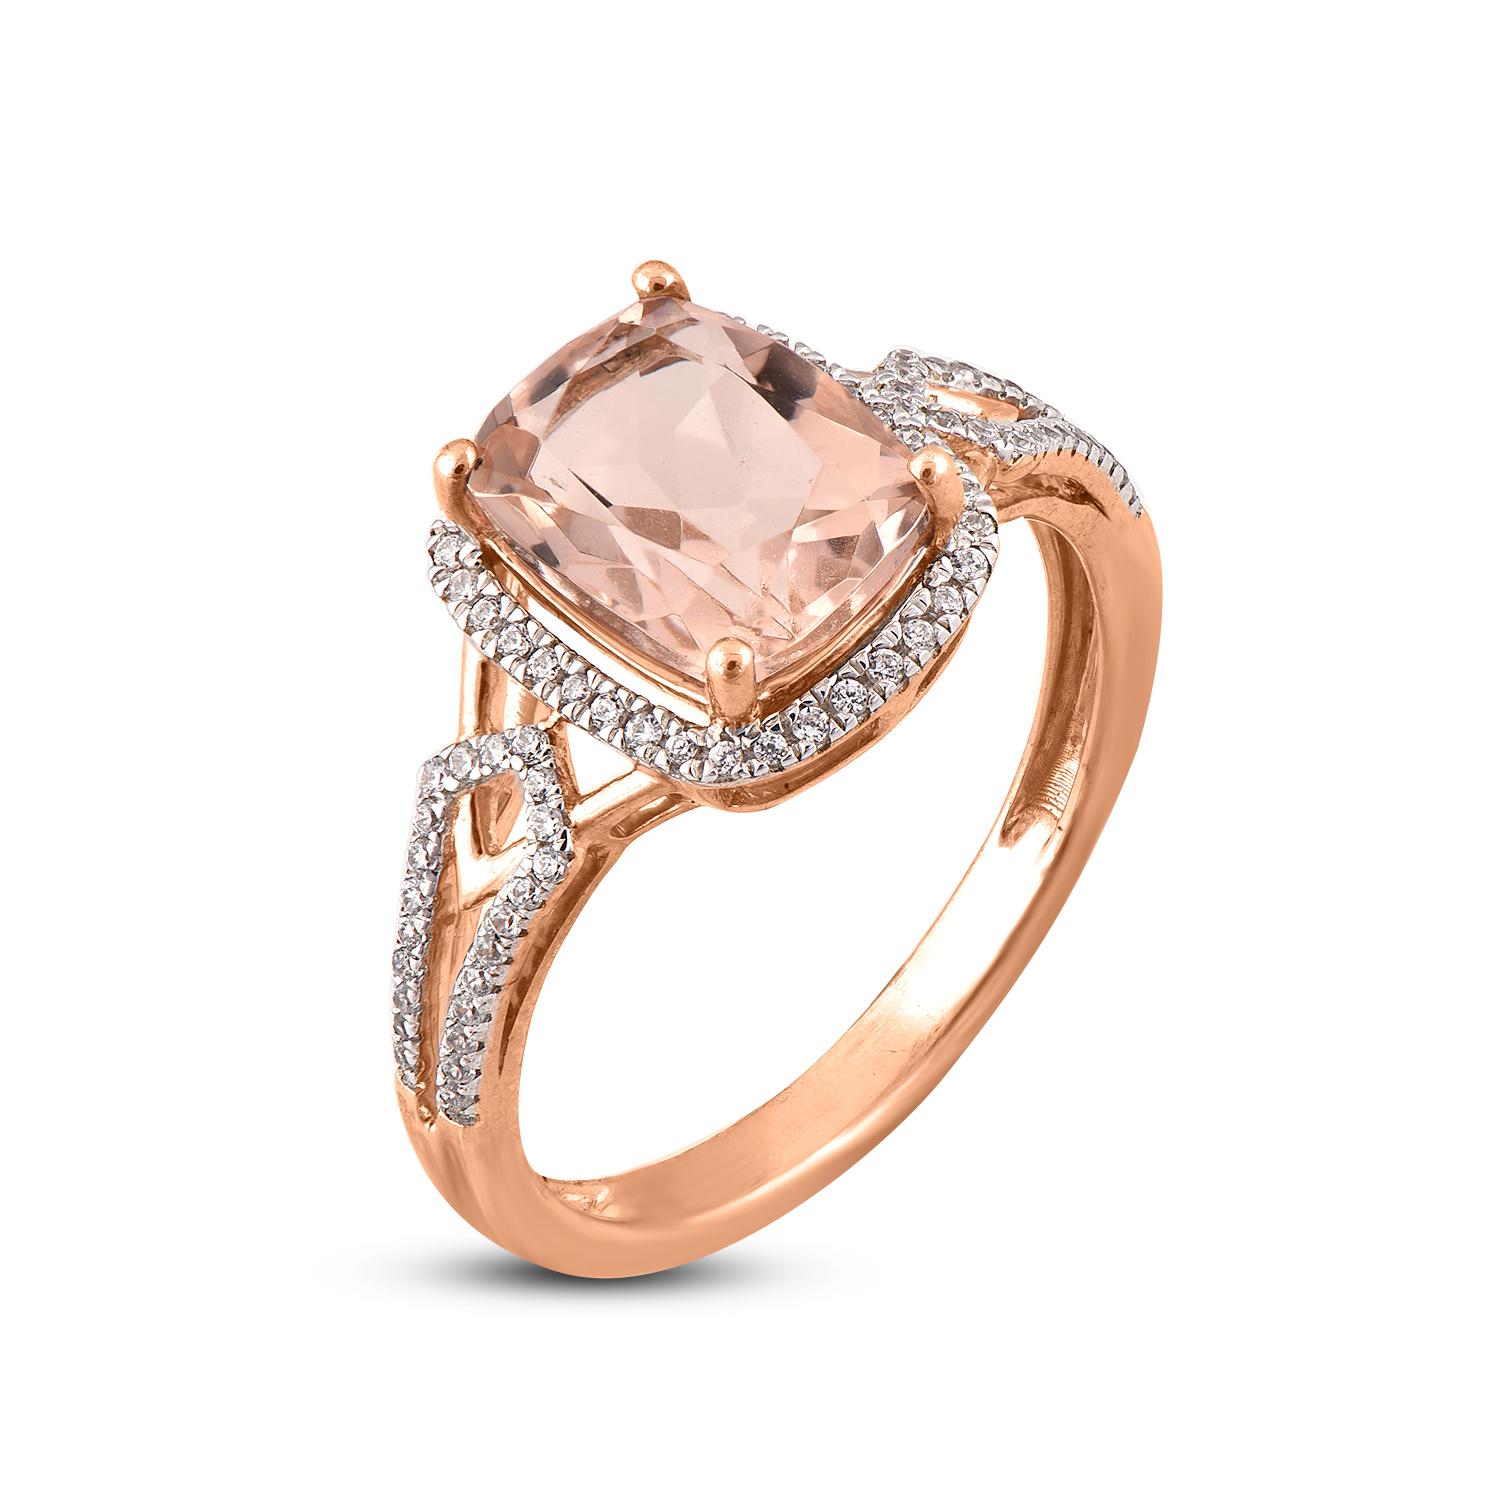 Beauty is how you feel inside, and it reflects in your eyes. This heart-melting ring made by our skillful artisans in 14 karat Rose gold with 80 round white diamond and 1 cushion shape morganite. Diamonds are graded H-I Color, I2 Clarity. it's a